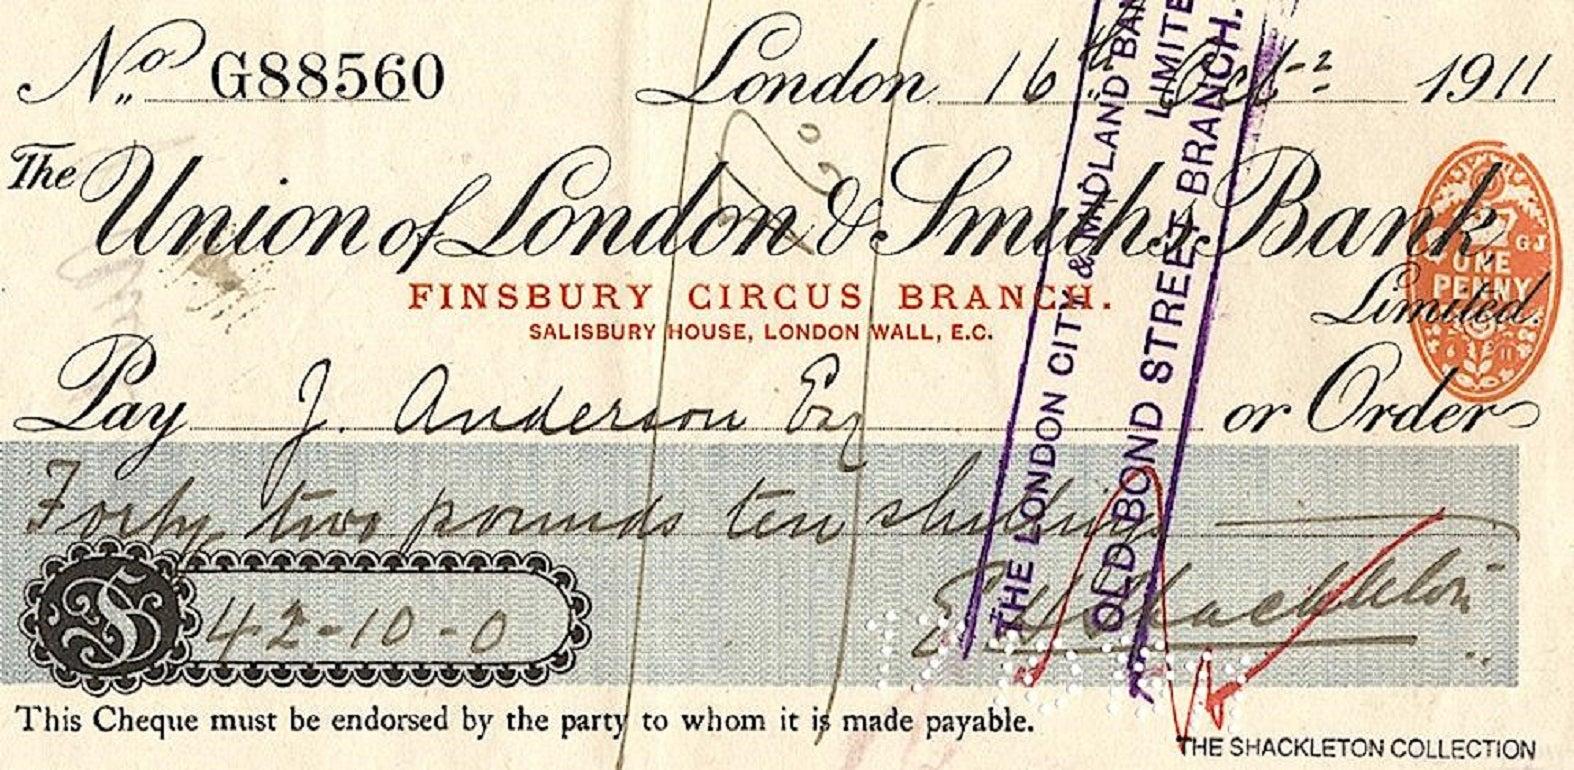 A unique bank cheque signed by the renowned Antarctic explorer Ernest Shackleton

Sir Ernest Shackleton (1874 – 1922) was an Irish Antarctic explorer who led three expeditions to the Antarctic. 

His most famous expedition was the Imperial